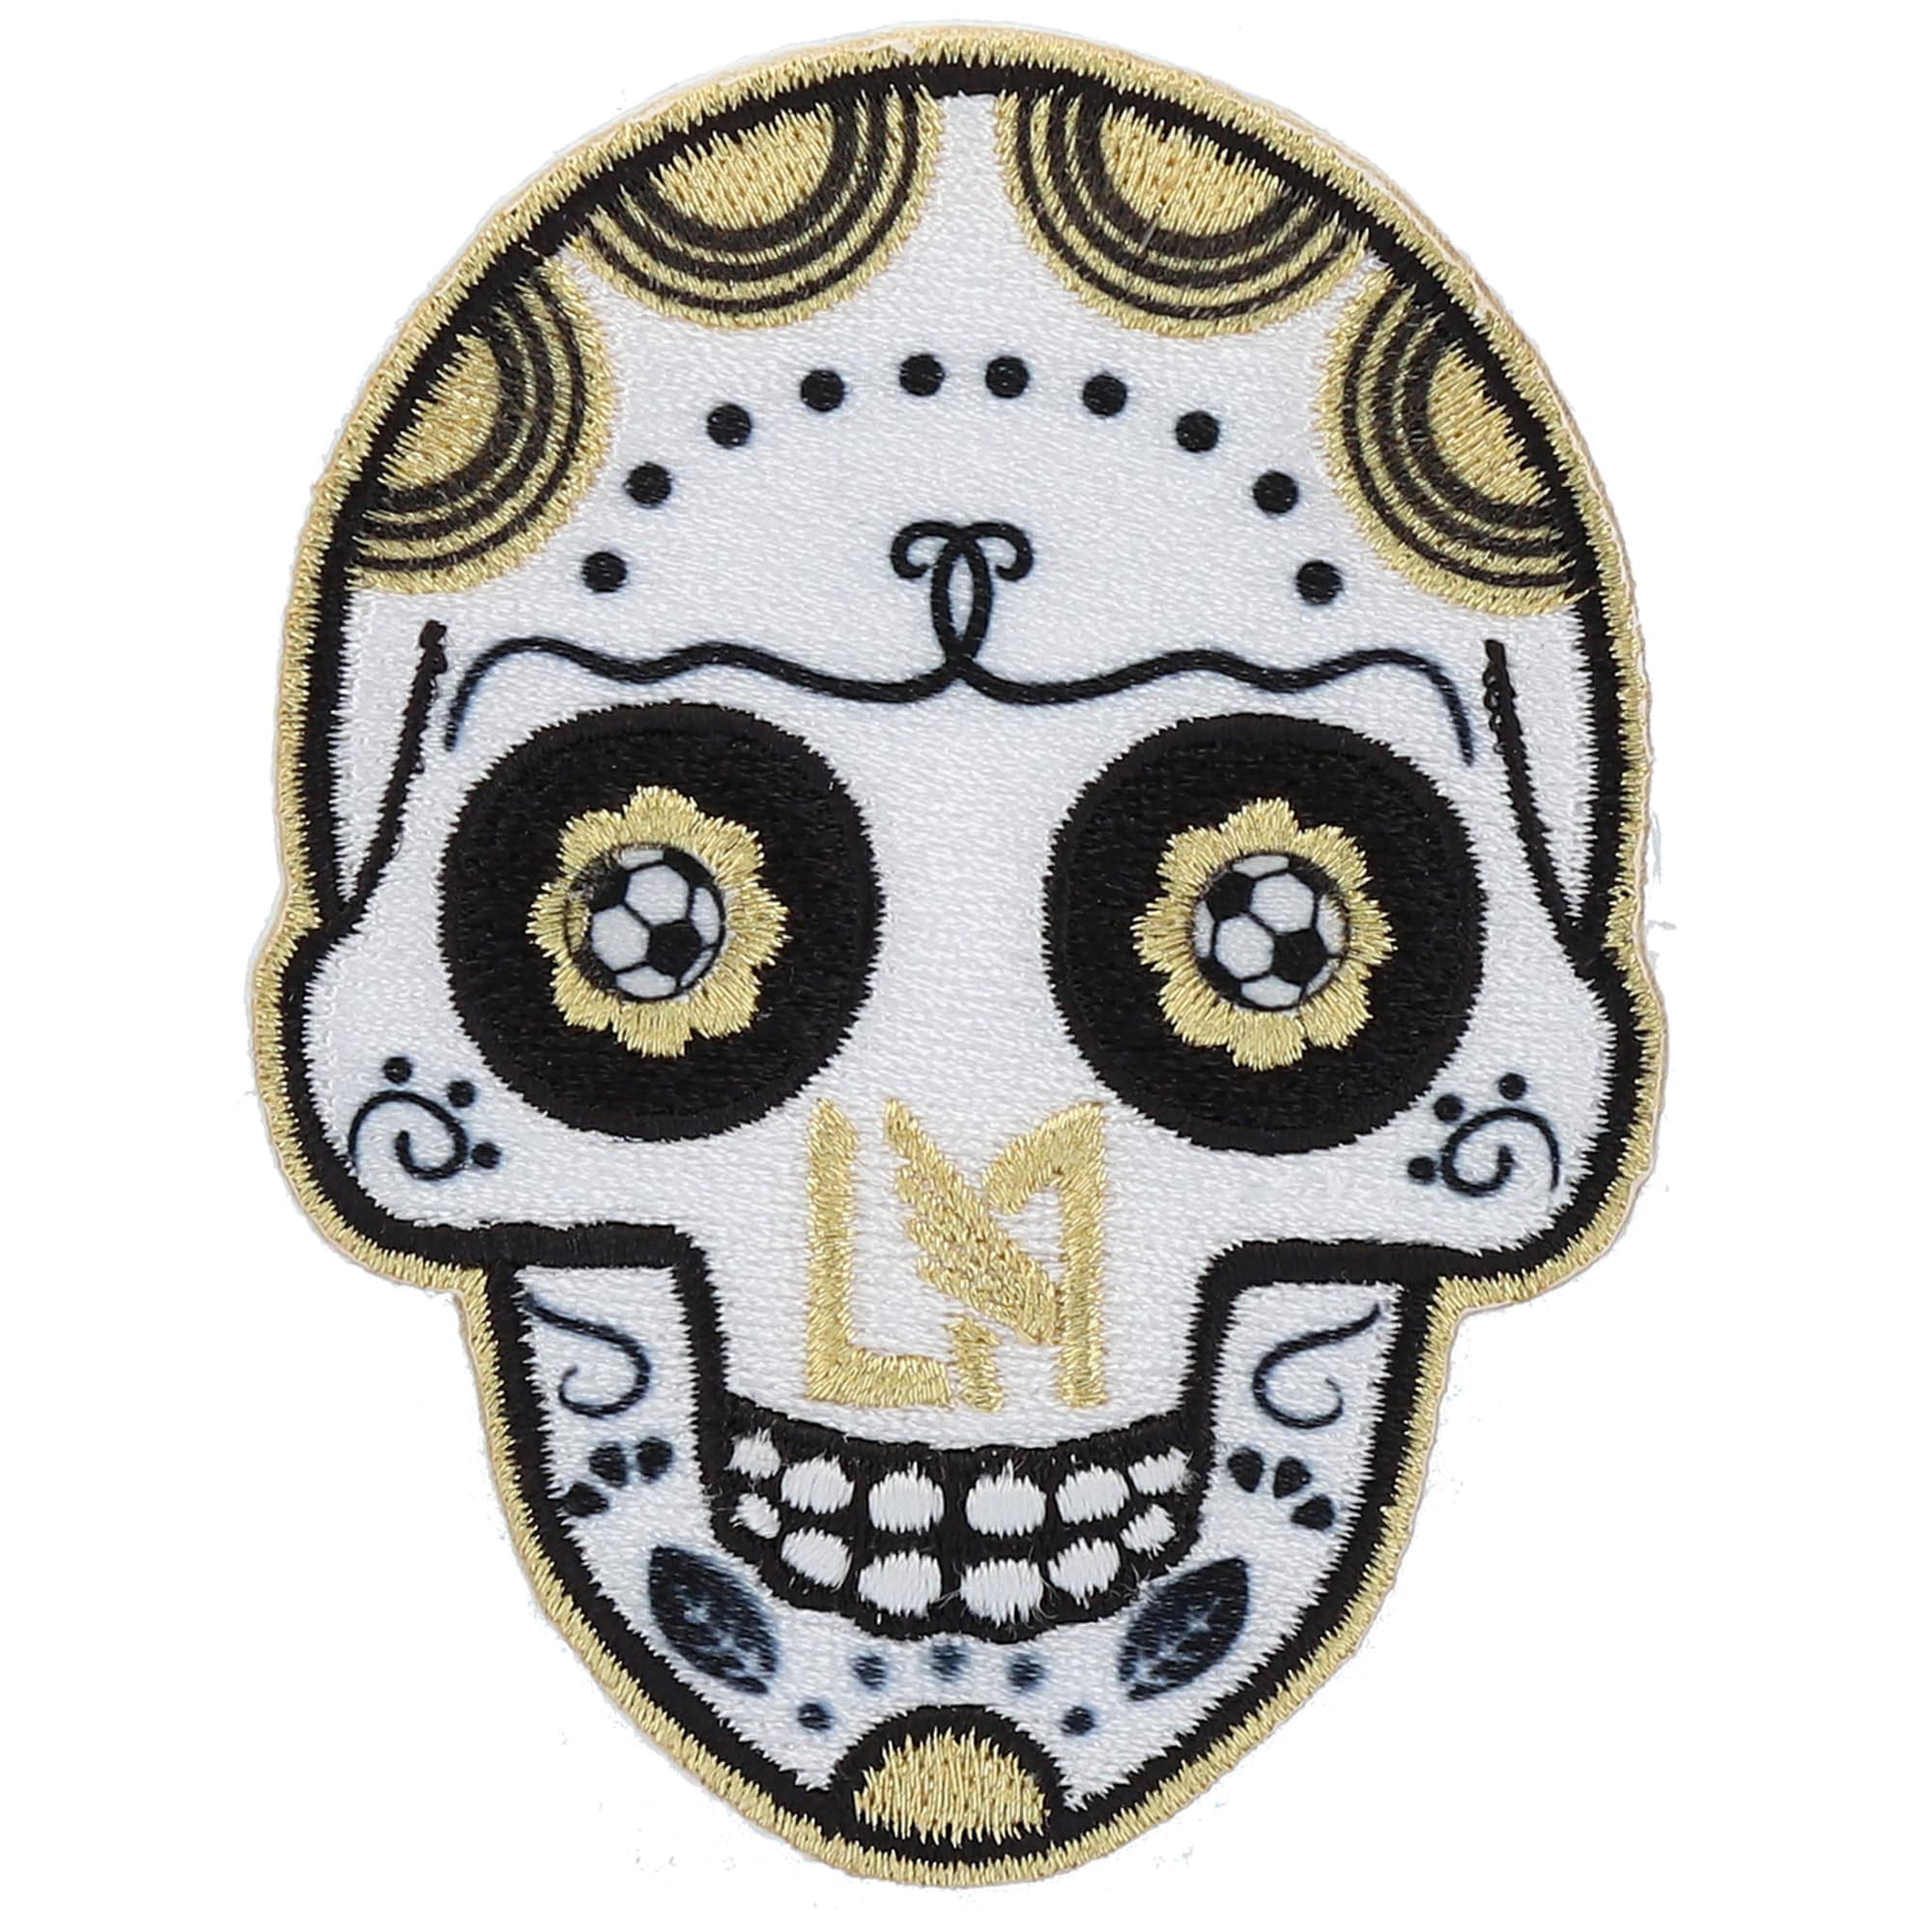 Sunny Buick Rose Sugar Skull EMBROIDERED IRON ON a15 sugar skull PATCH 